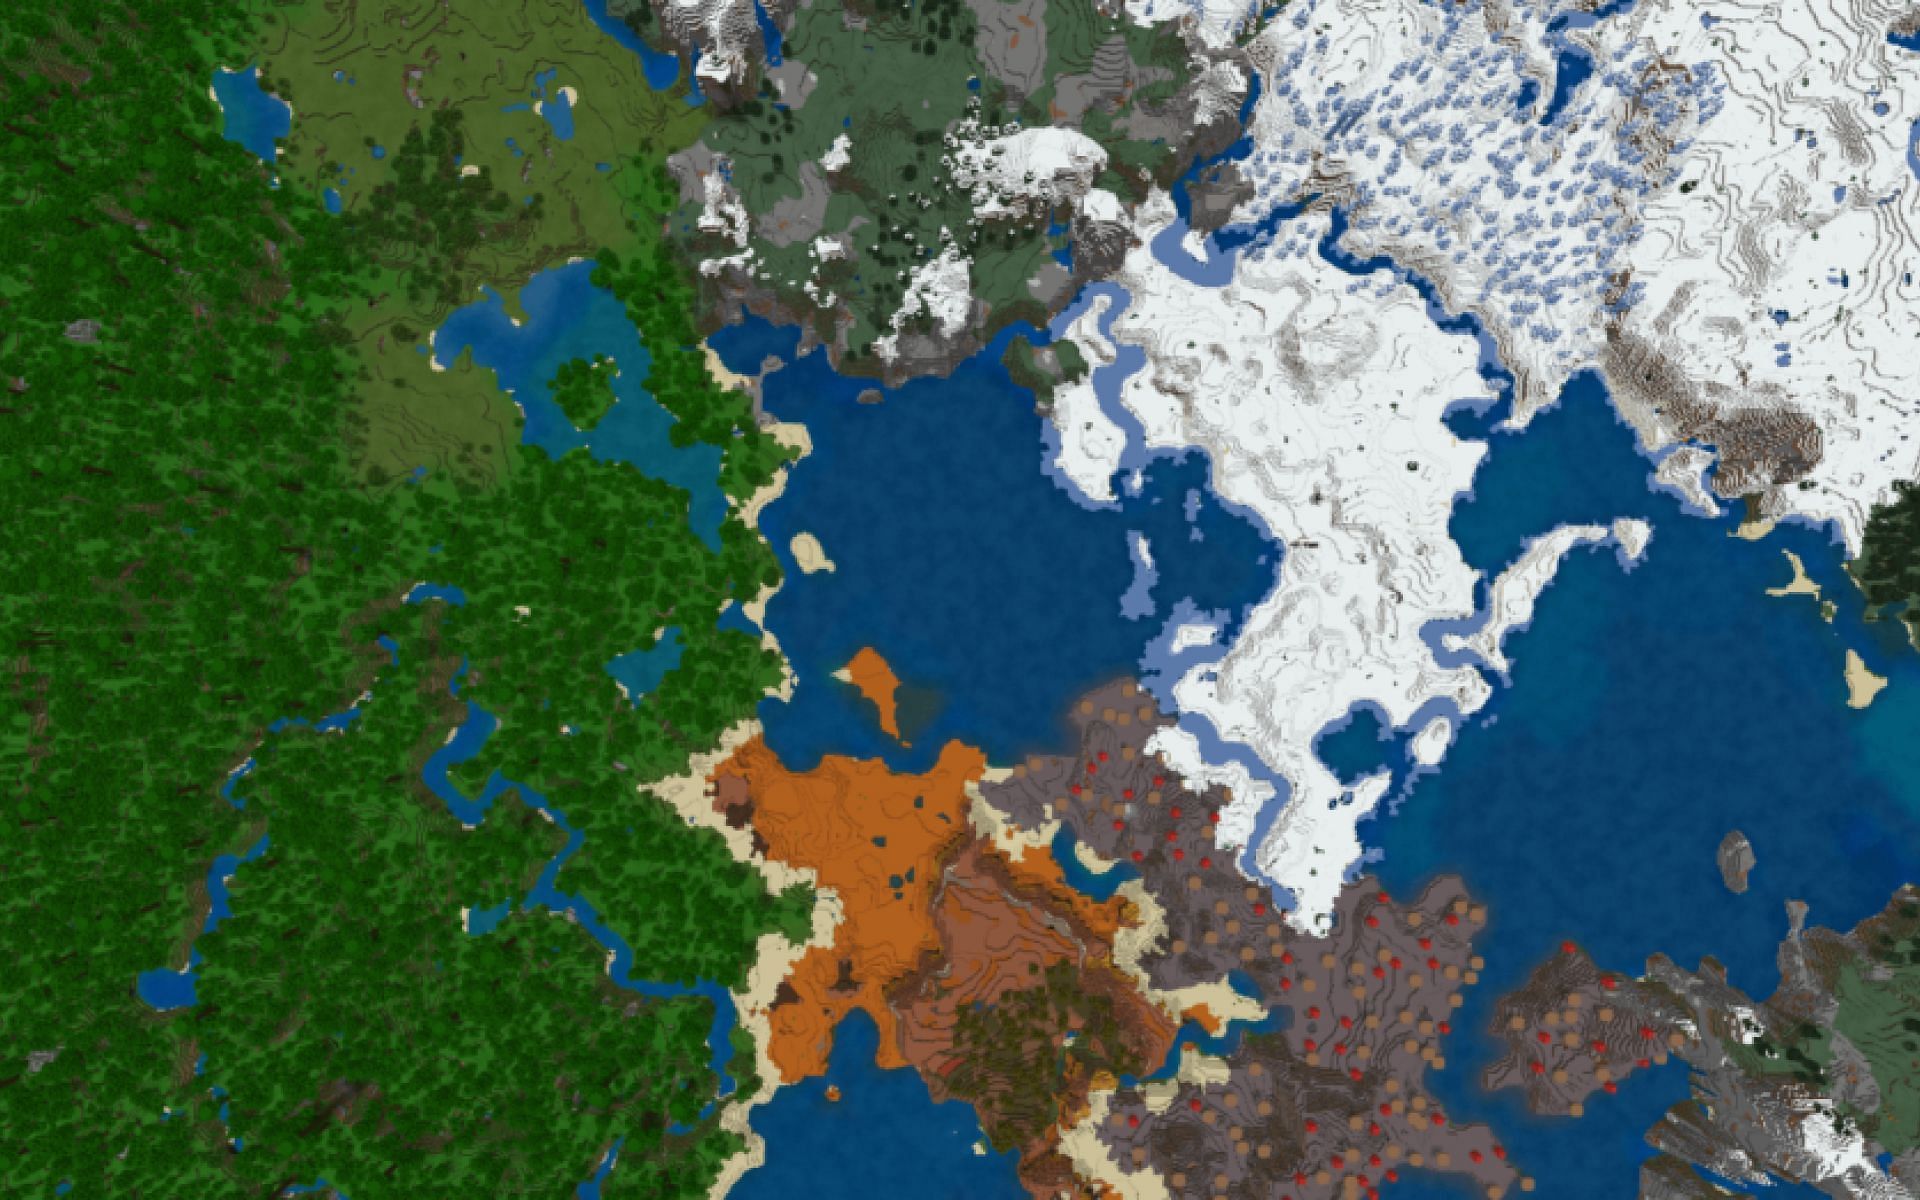 An image of the biomes players can find in-game. (Image via Mojang/u/ricecake1111113 on Reddit)